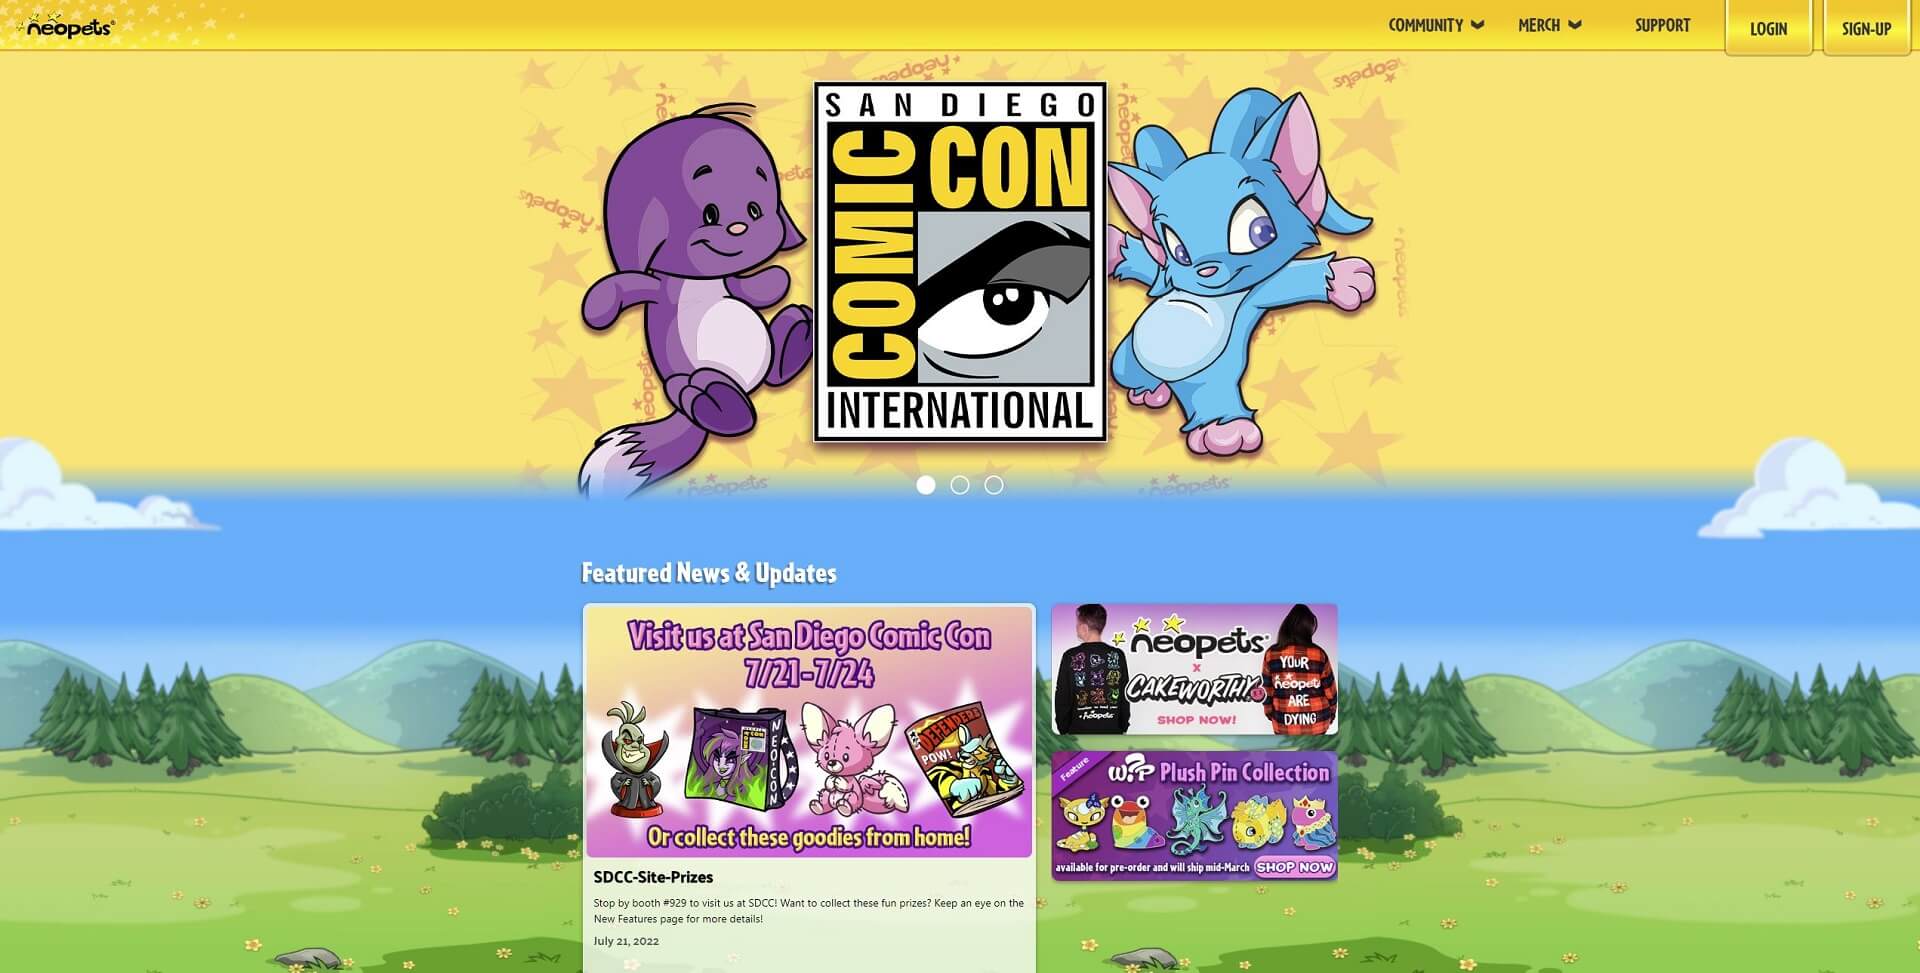 The front page of the Neopets website